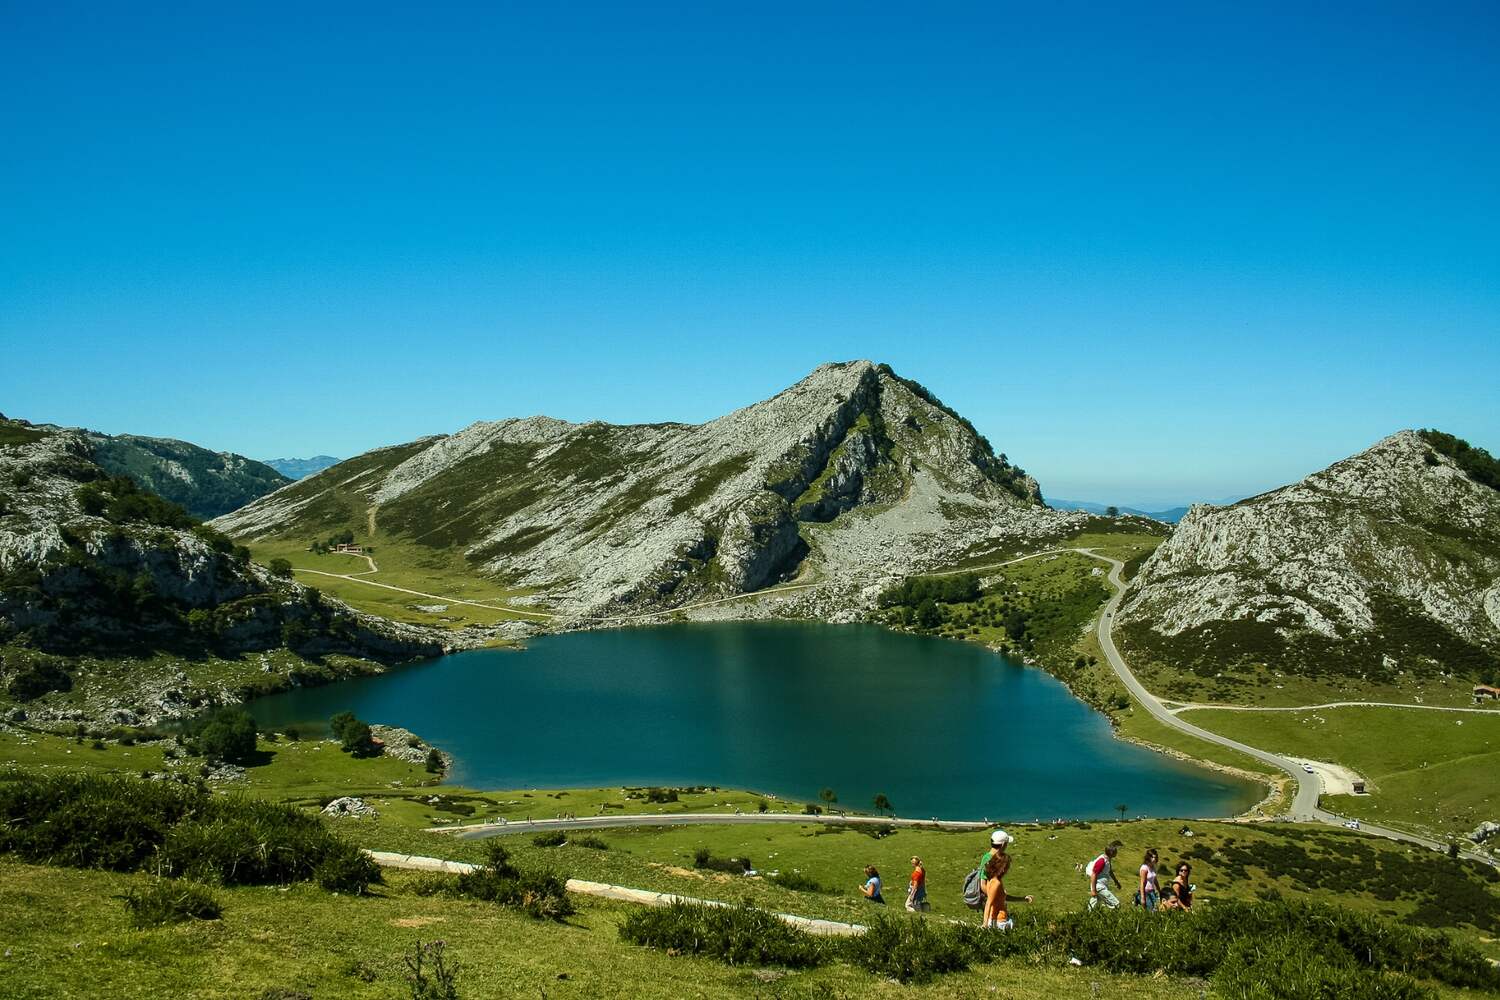 Enol Lake in the Picos de Europa National Park, Spain, surrounded by lush green slopes and a clear blue sky.